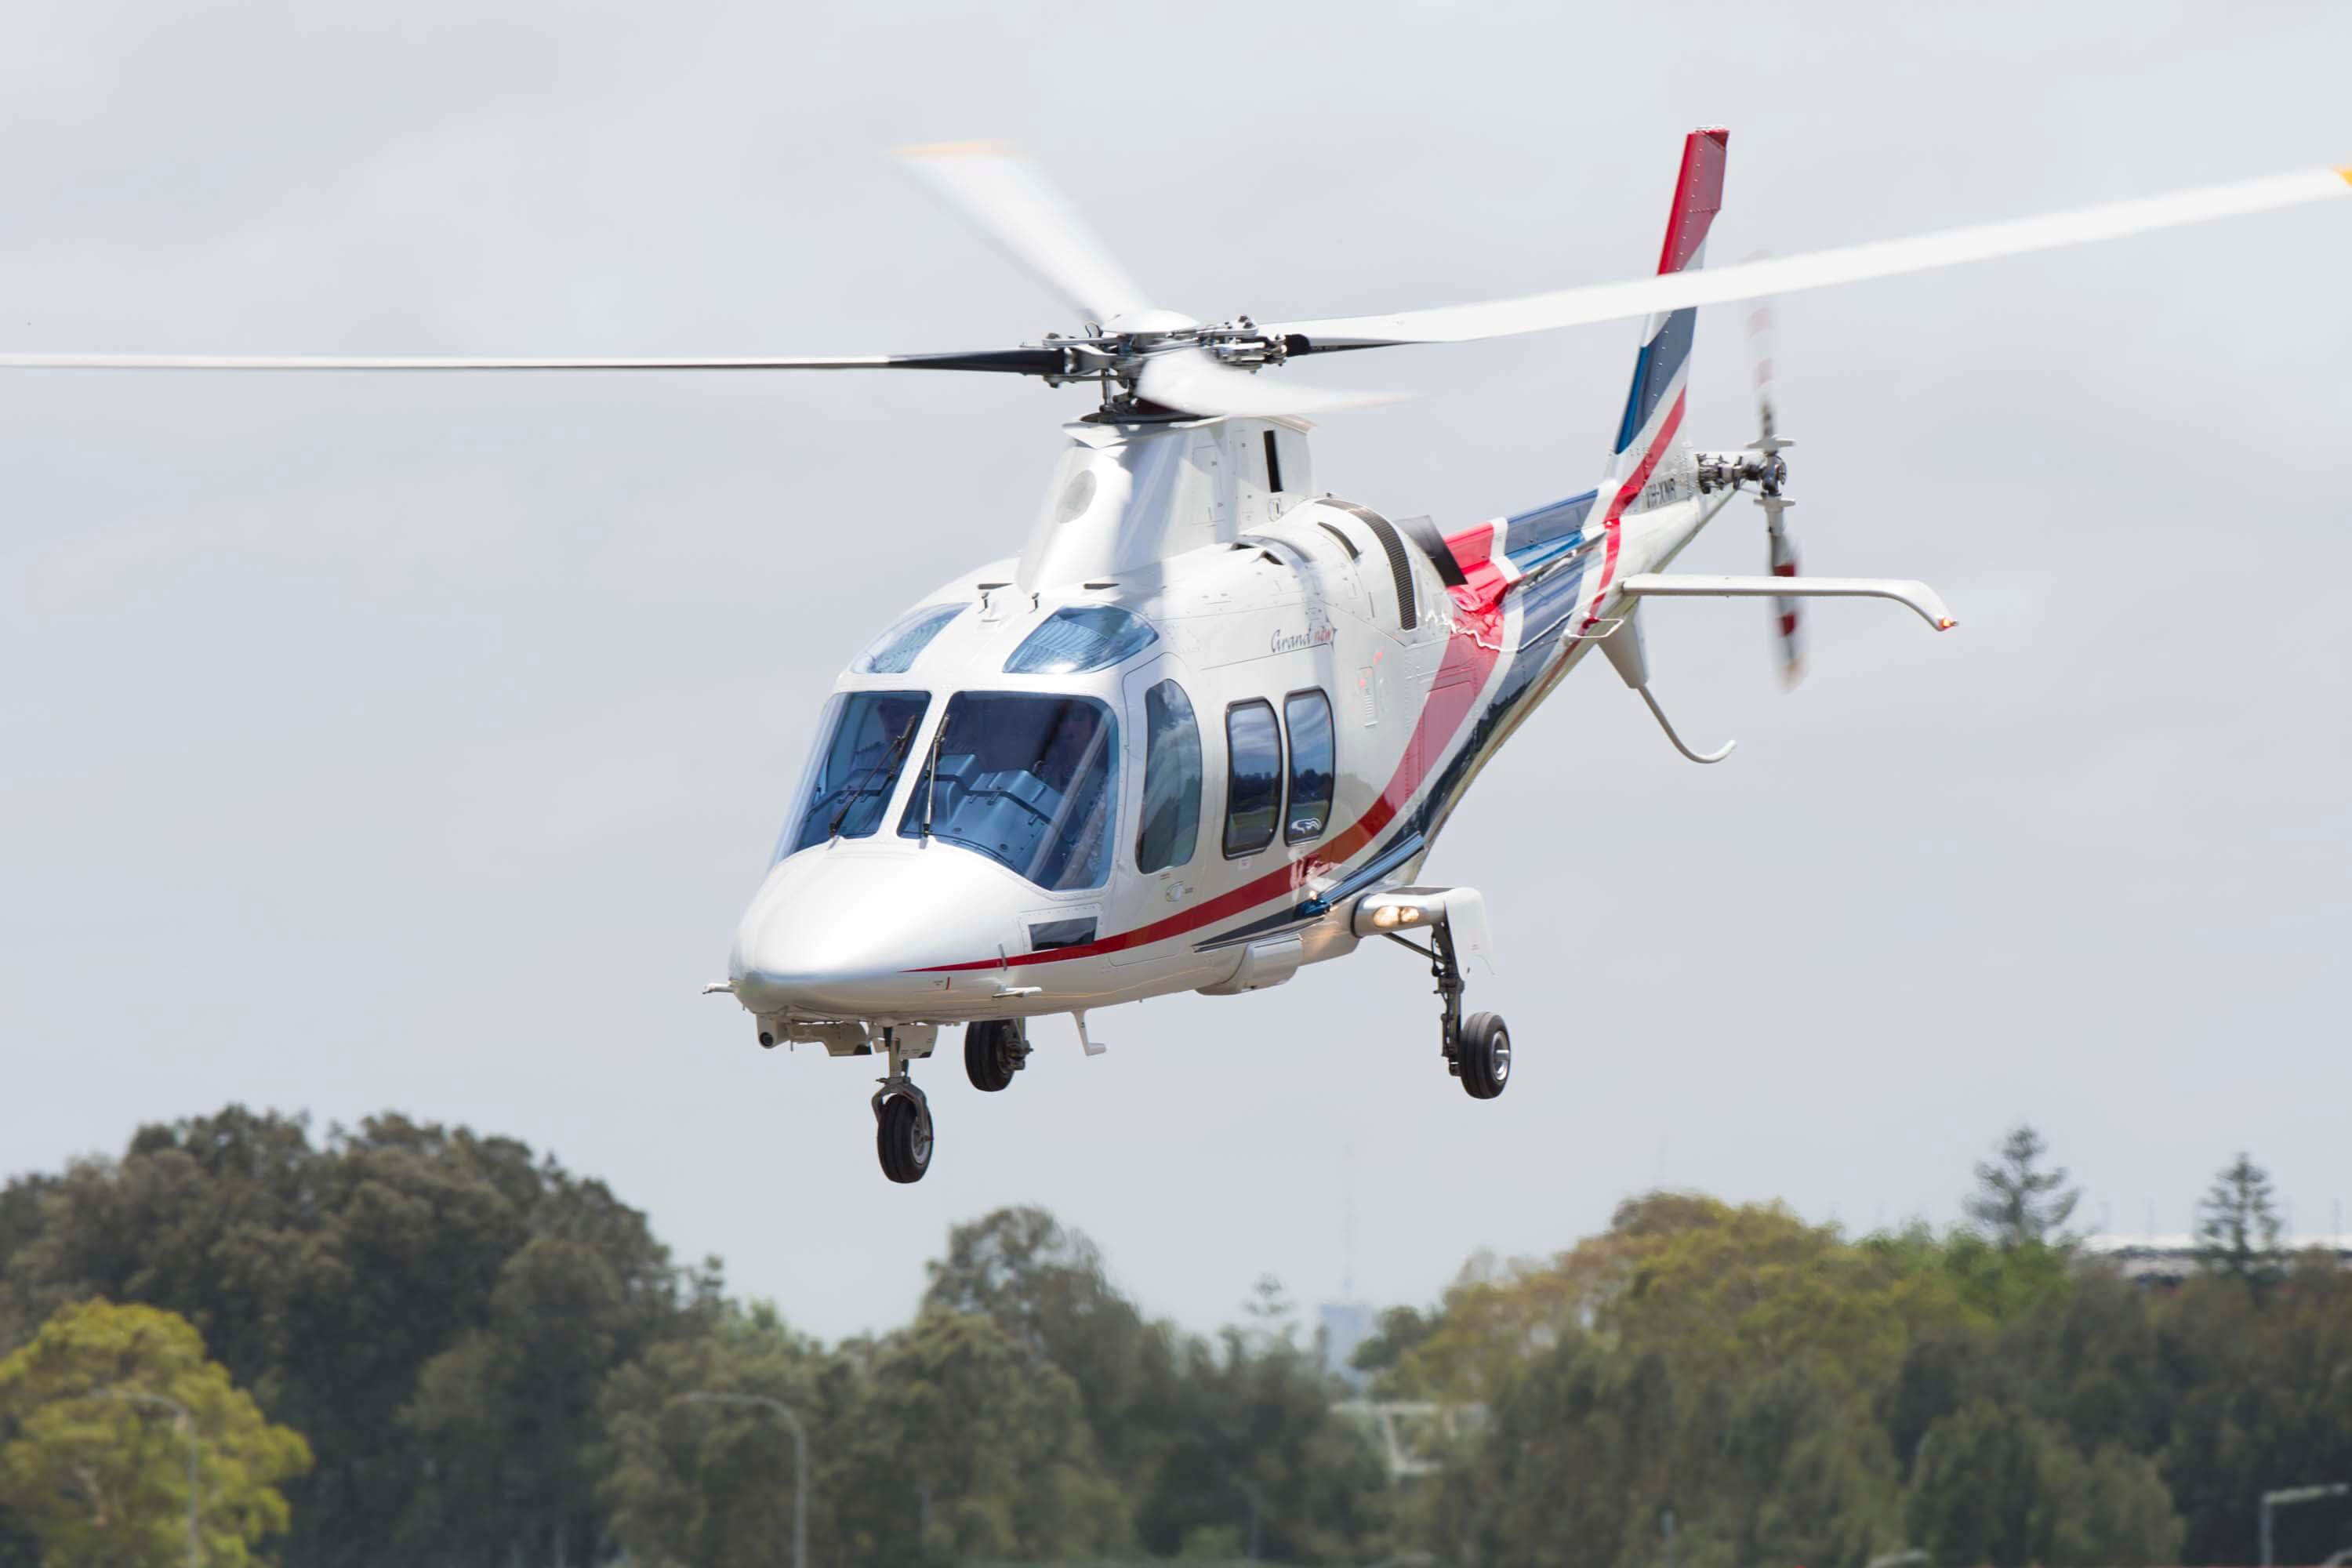 Helicopter rent in ahmeddabad